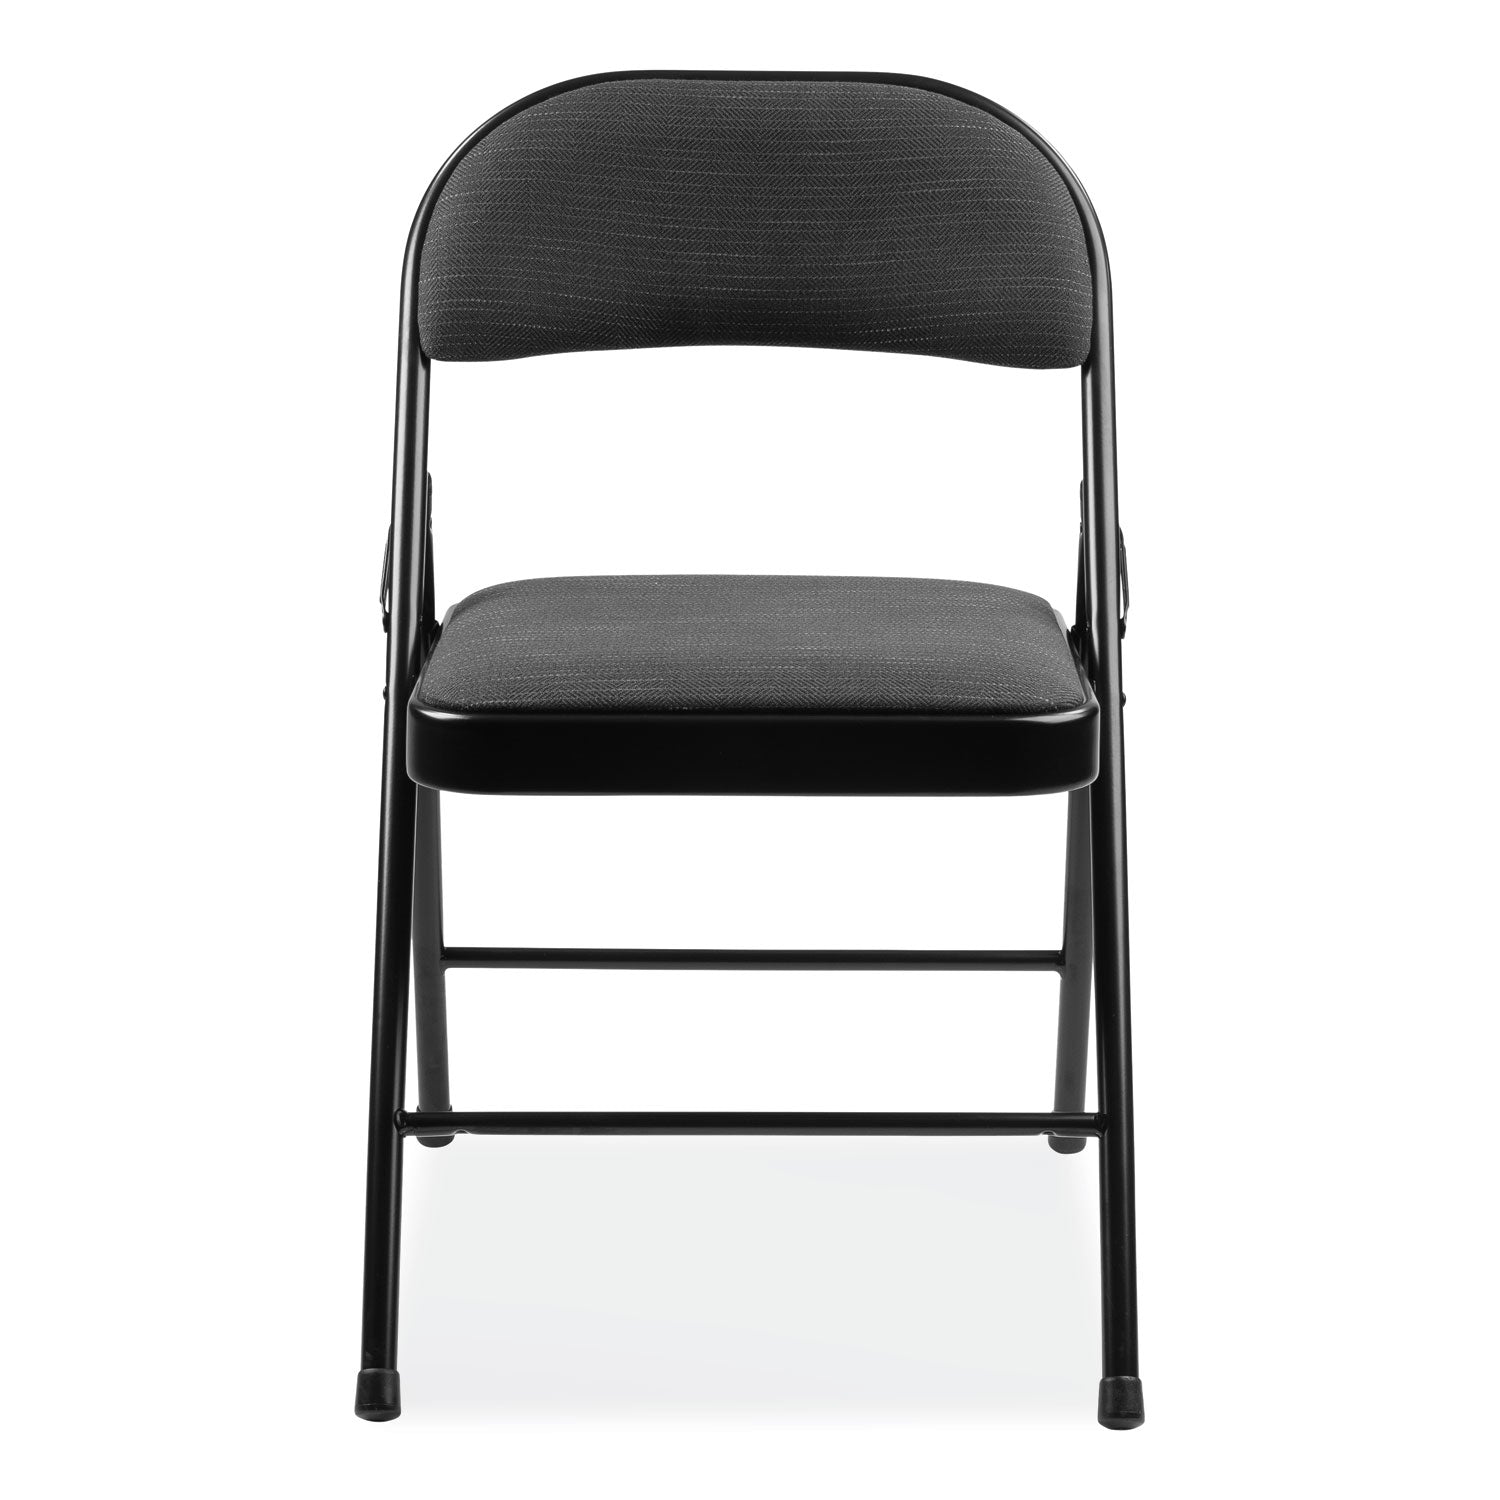 970-series-fabric-padded-steel-folding-chair-supports-250-lb-1775-seat-ht-star-trail-black-4-ct-ships-in-1-3-bus-days_nps970 - 4